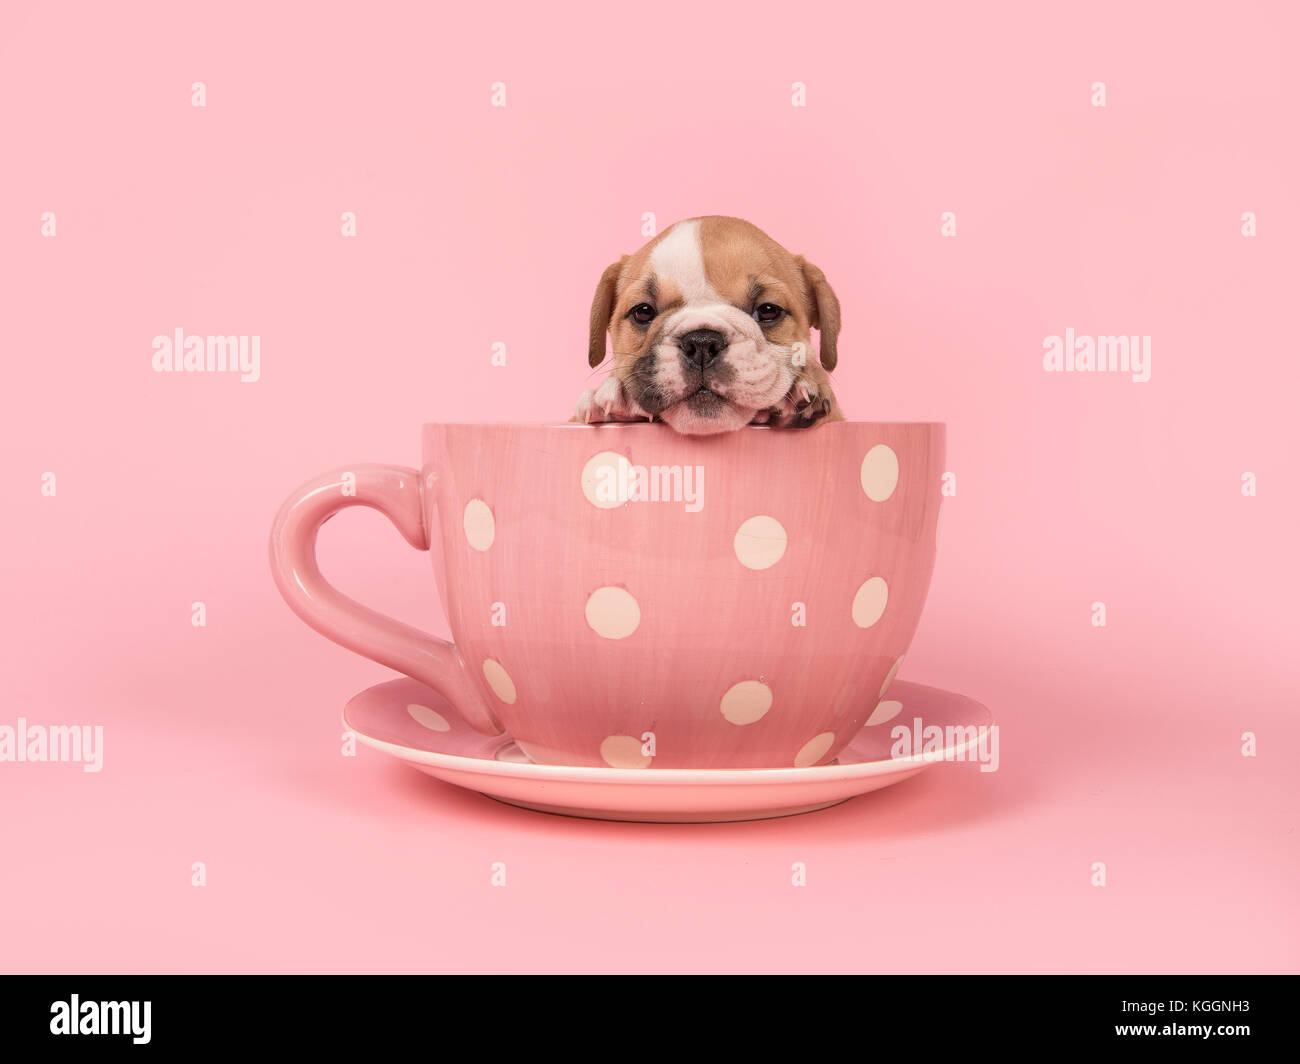 English bulldog puppy facing the camera hanging over the edge of a pink and white dotted cup and saucer on a pink background Stock Photo